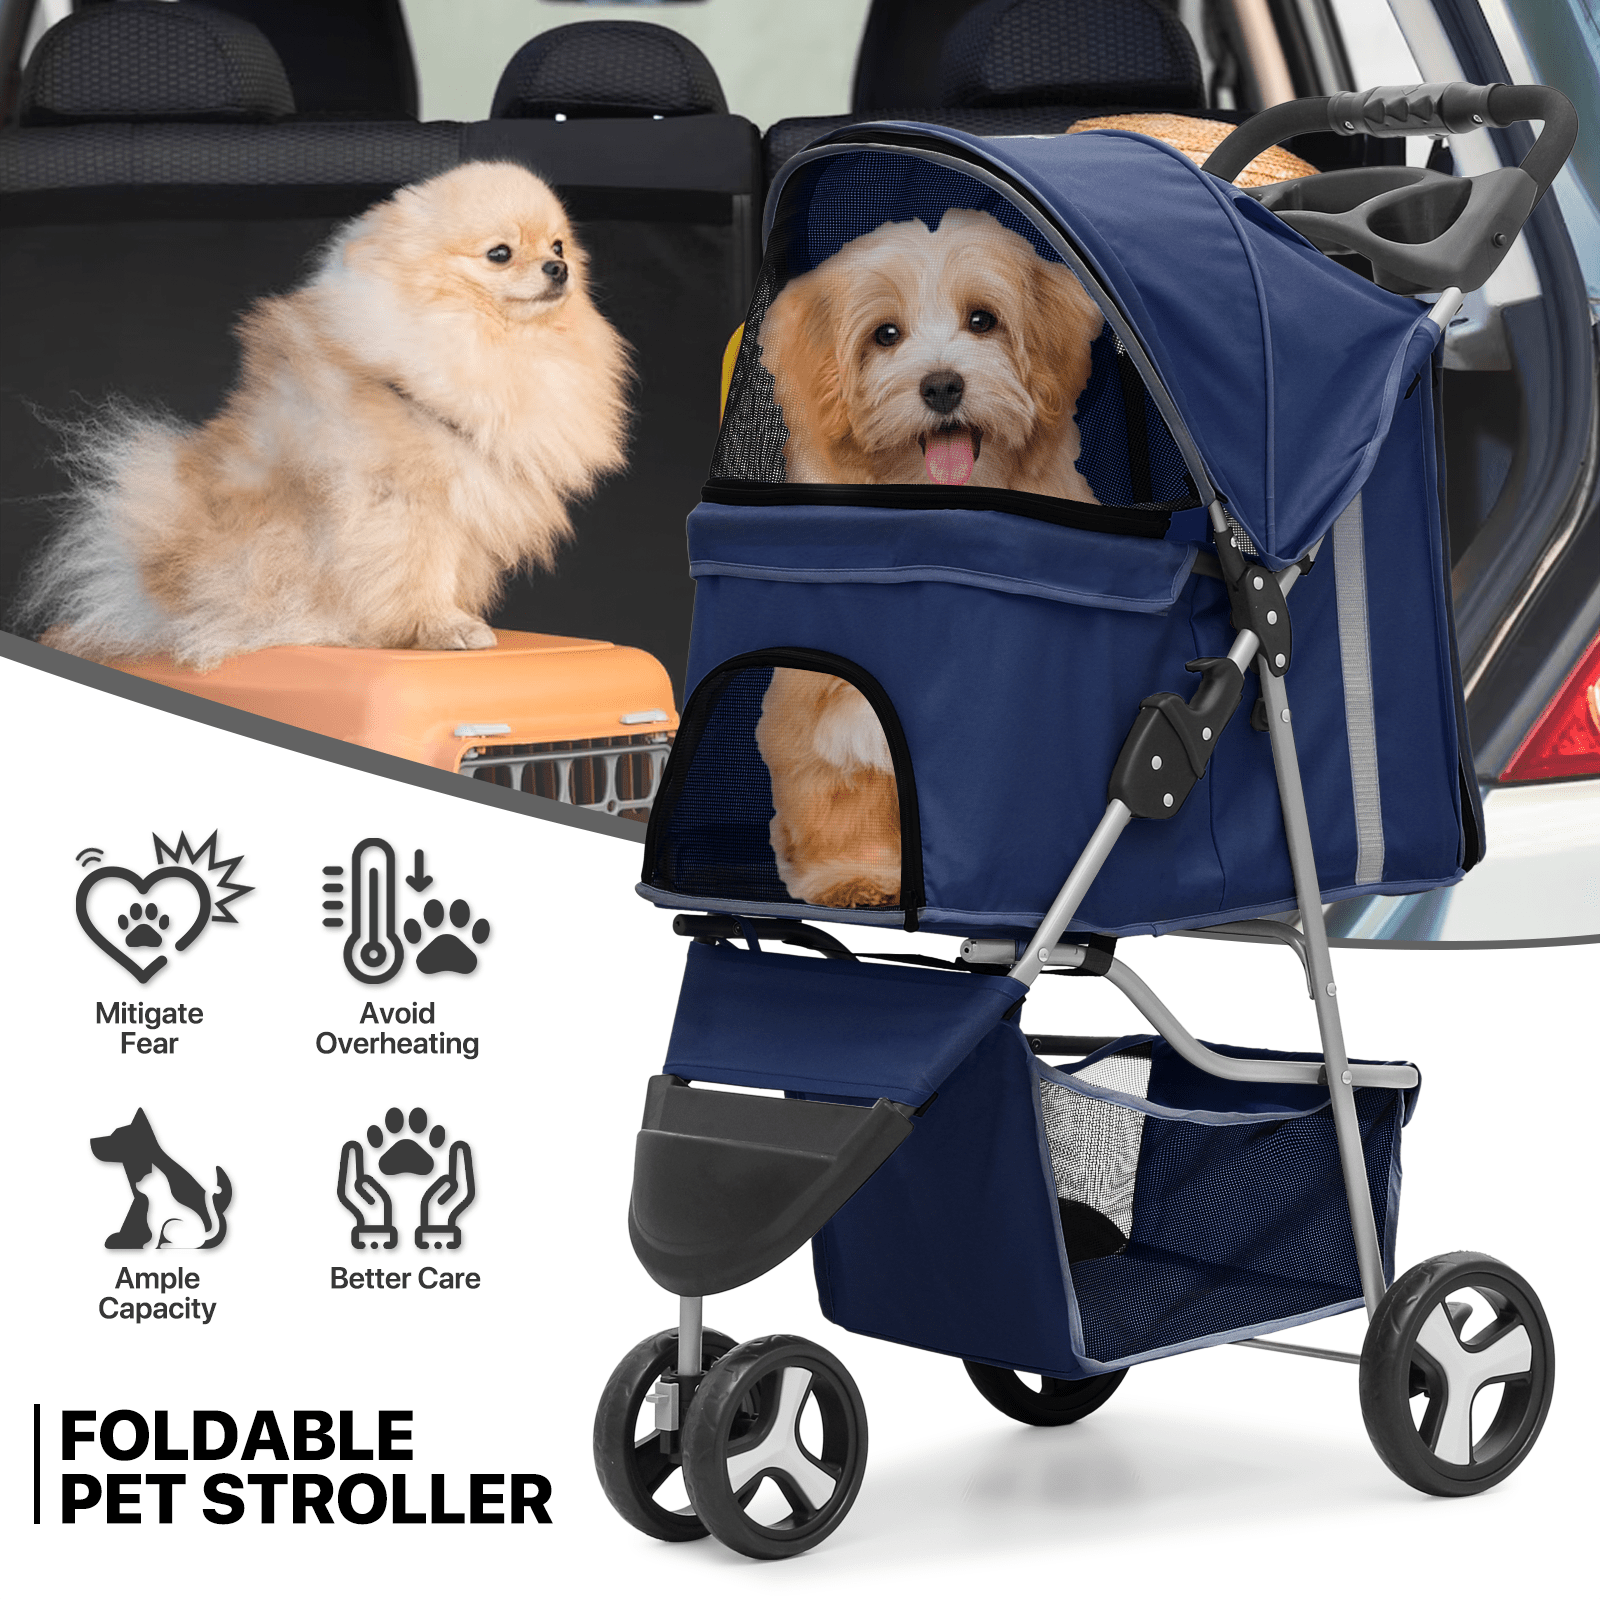 

Foldable Dog Strollers For Small Dogs With Weather Cover, 3 Wheels Pet Strolling Cart For Dogs And Cats With Storage Basket And Cup Holder, Breathable And Visible Mesh For All-season